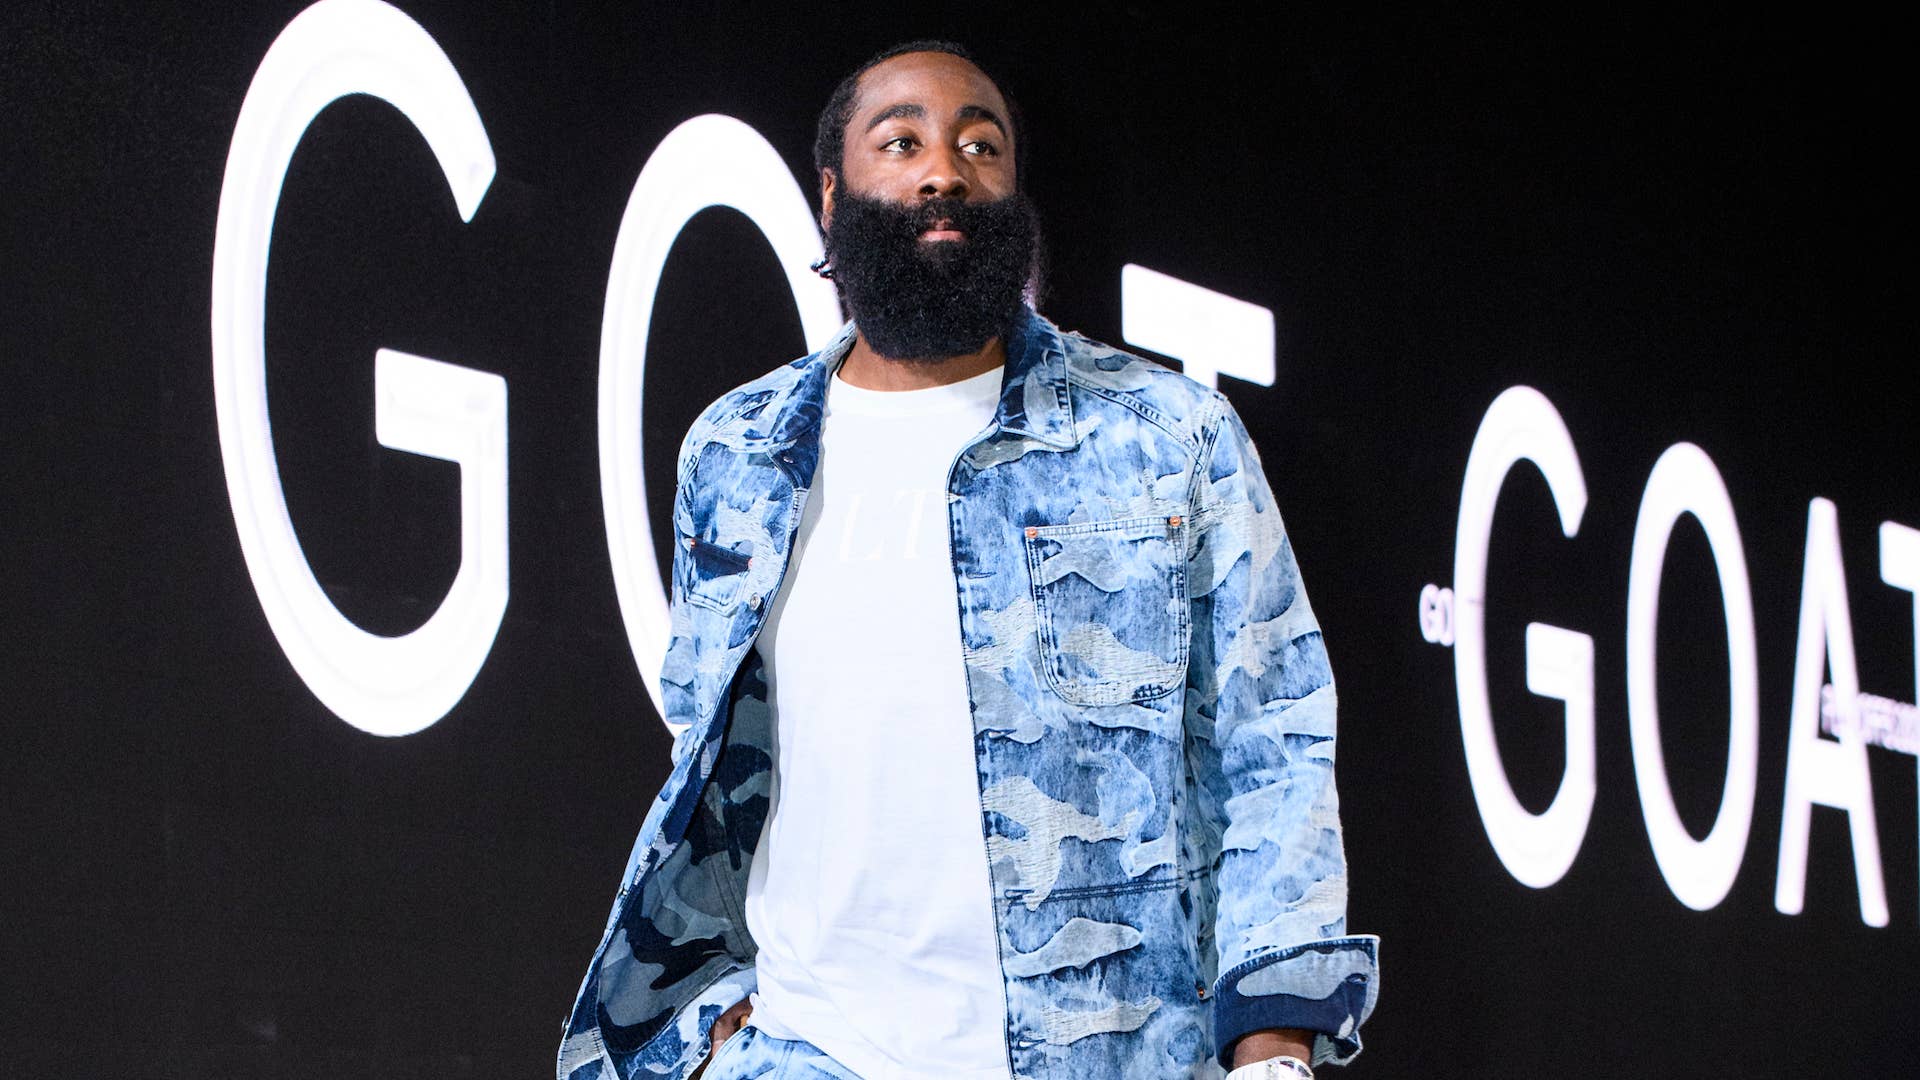 James Harden #13 of the Brooklyn Nets arrives to the arena before the game